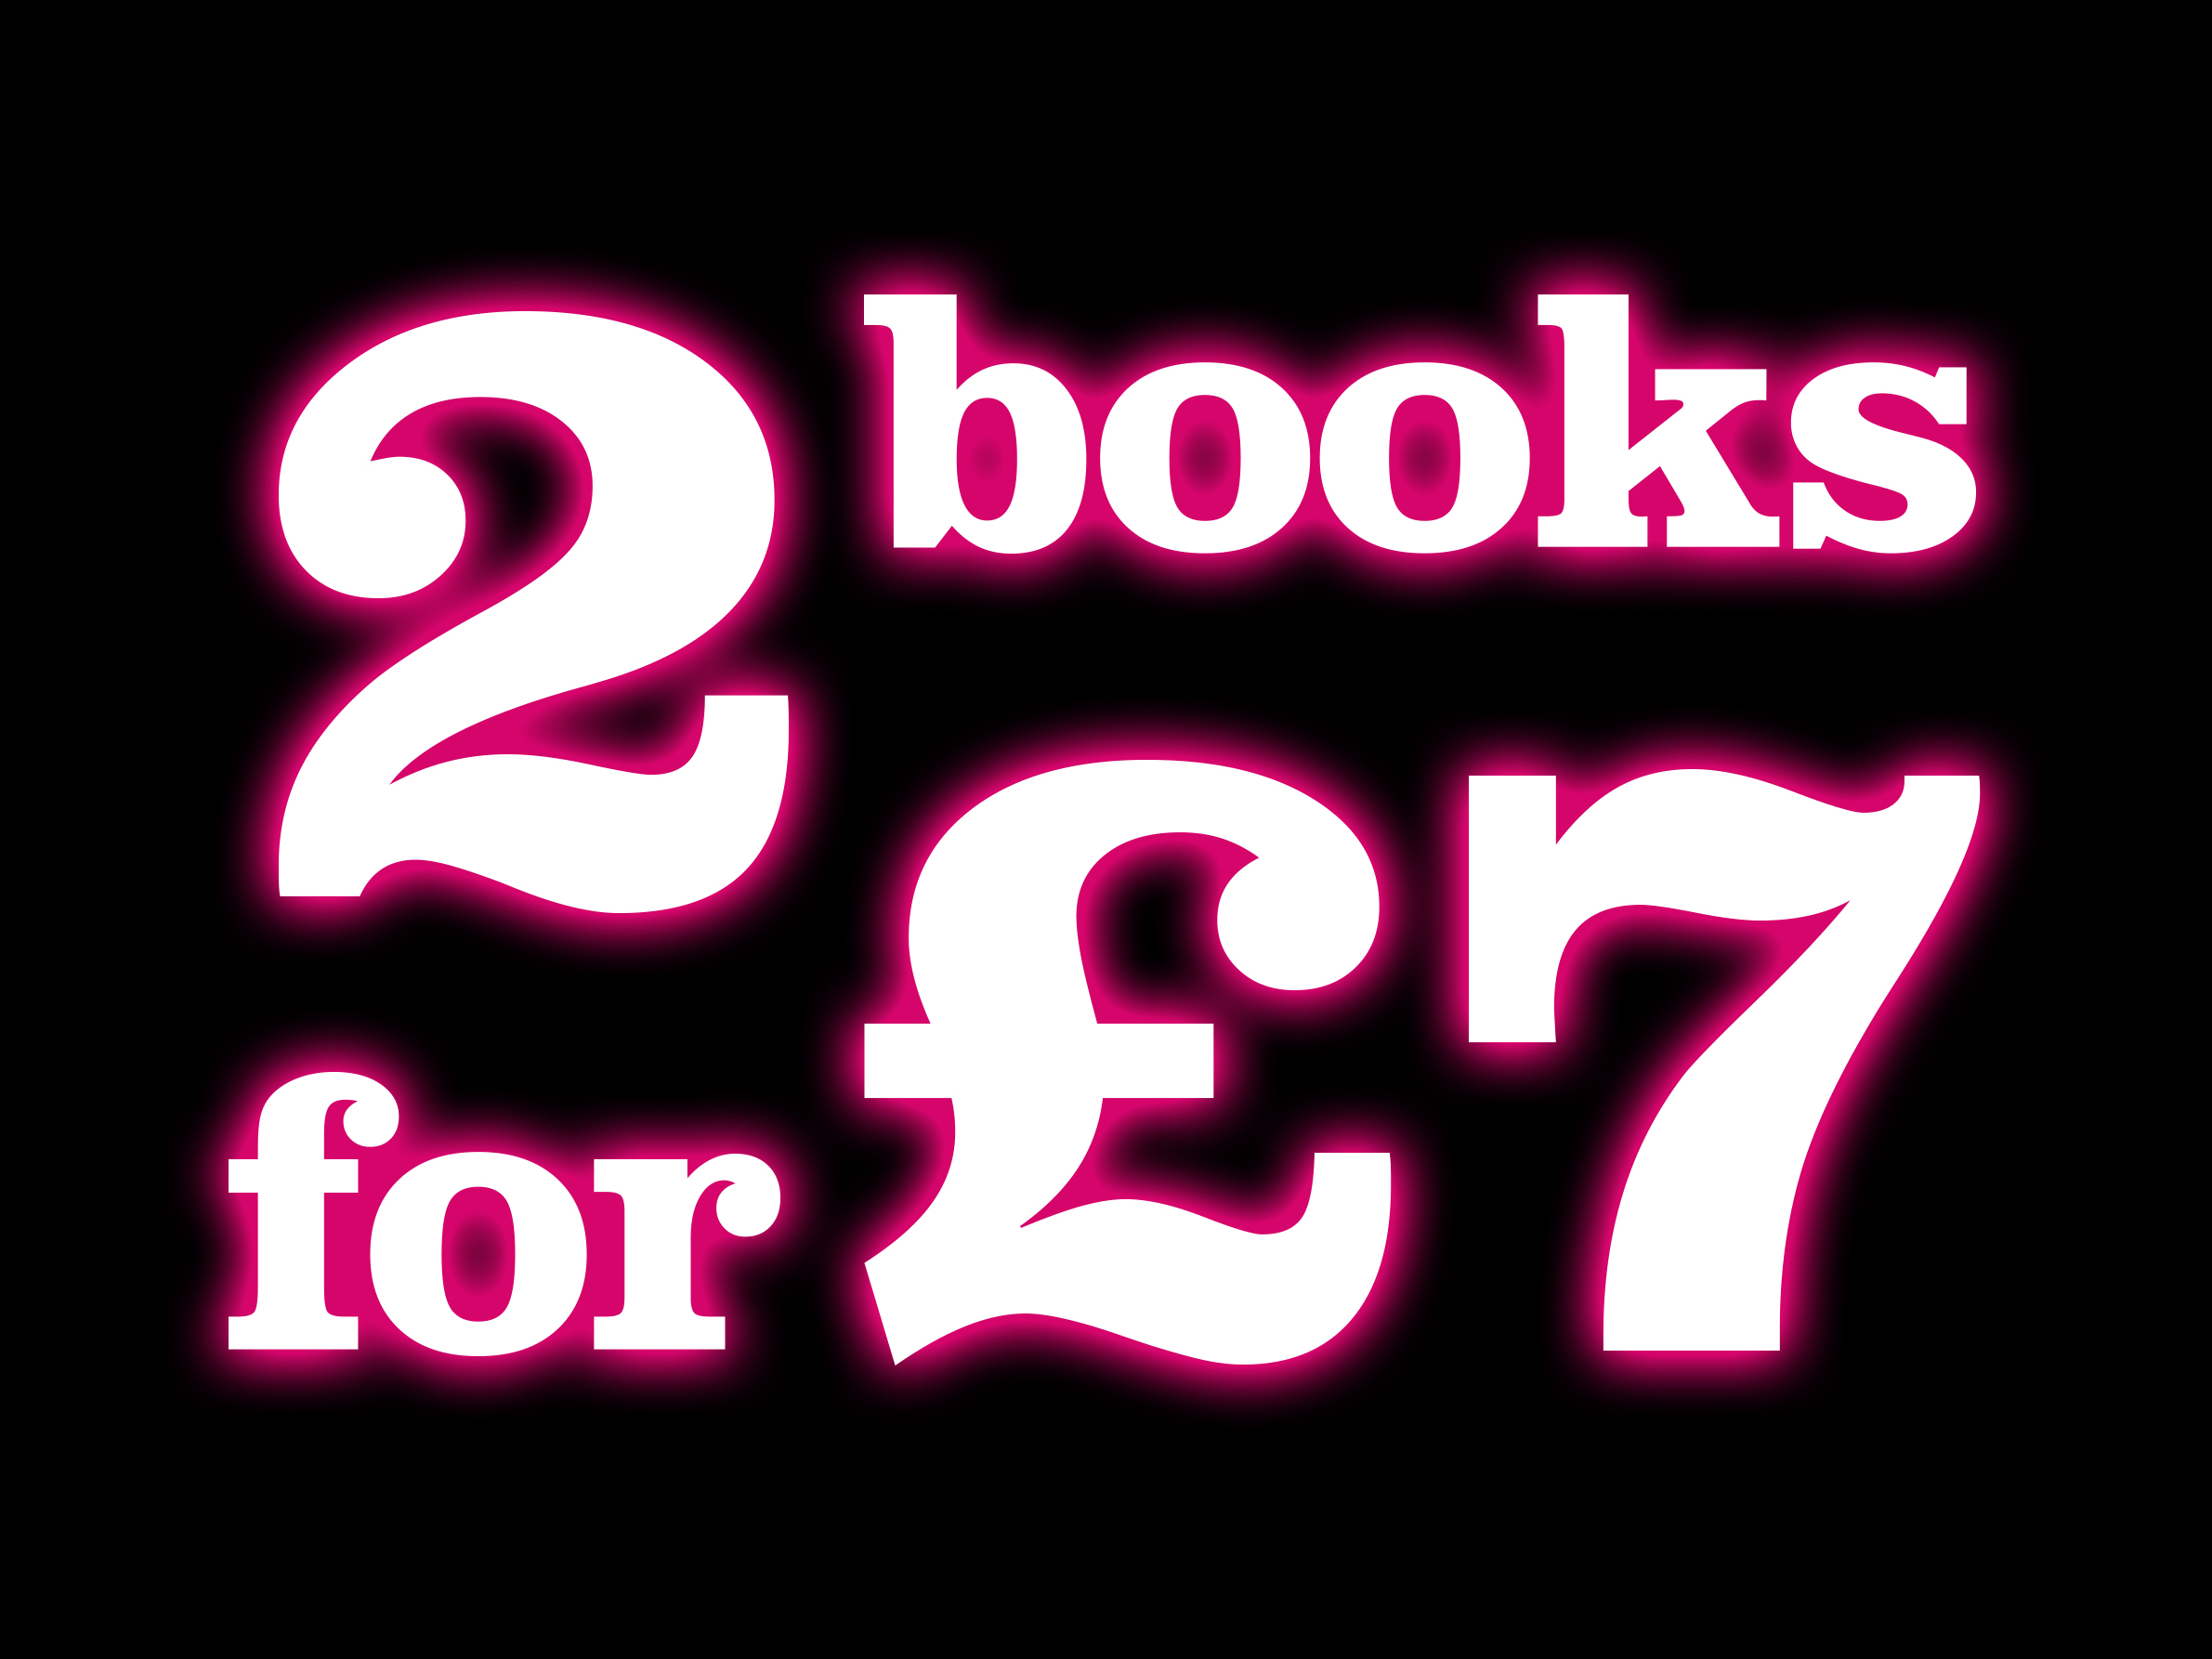 Book Offers - 2 for £7